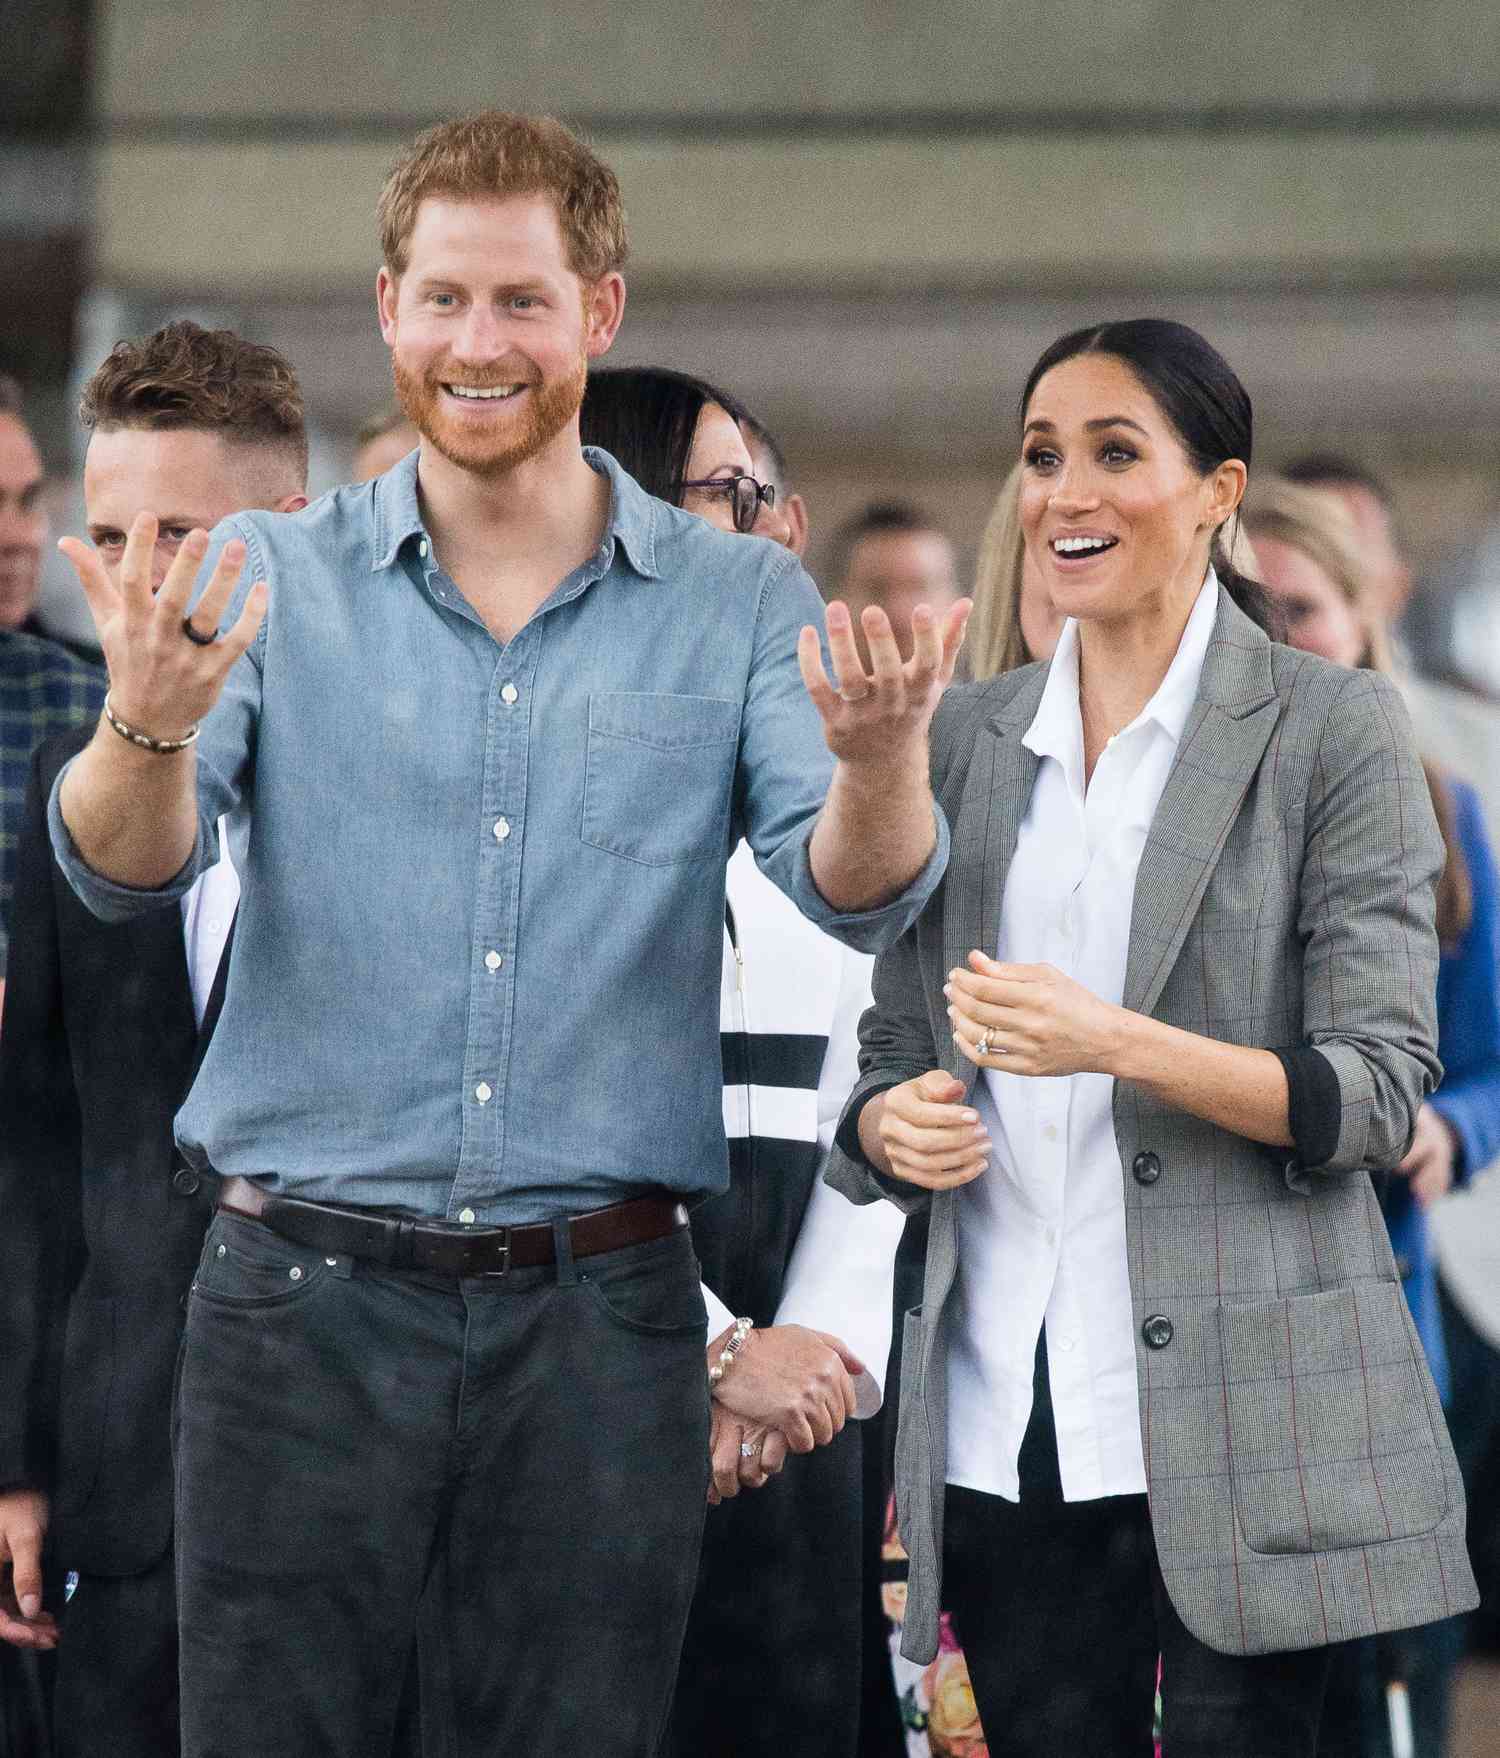 Prince Harry and Meghan Duchess of Sussex tour of Australia - 17 Oct 2018